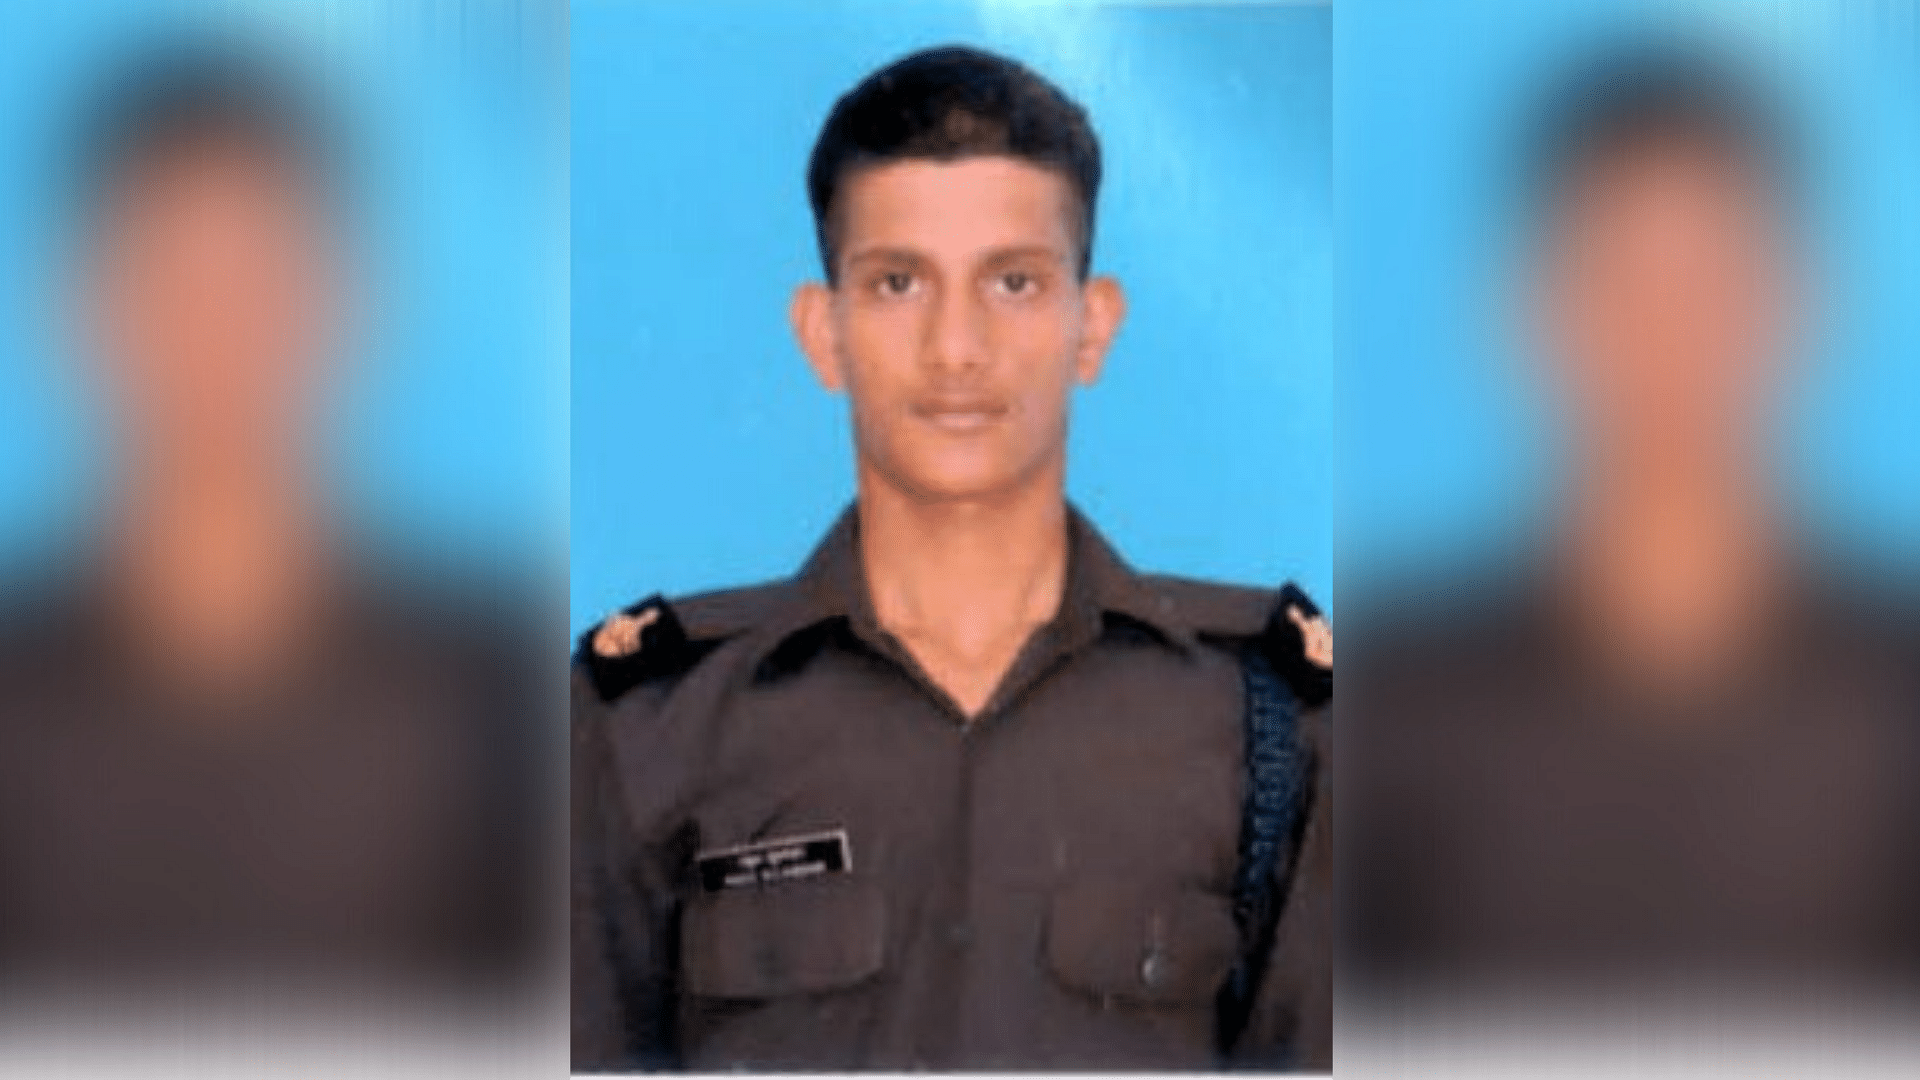  21-year-old Sepoy Rahul Bhairu Sulagekar was martyred in the line of duty along the LoC on 8 November.